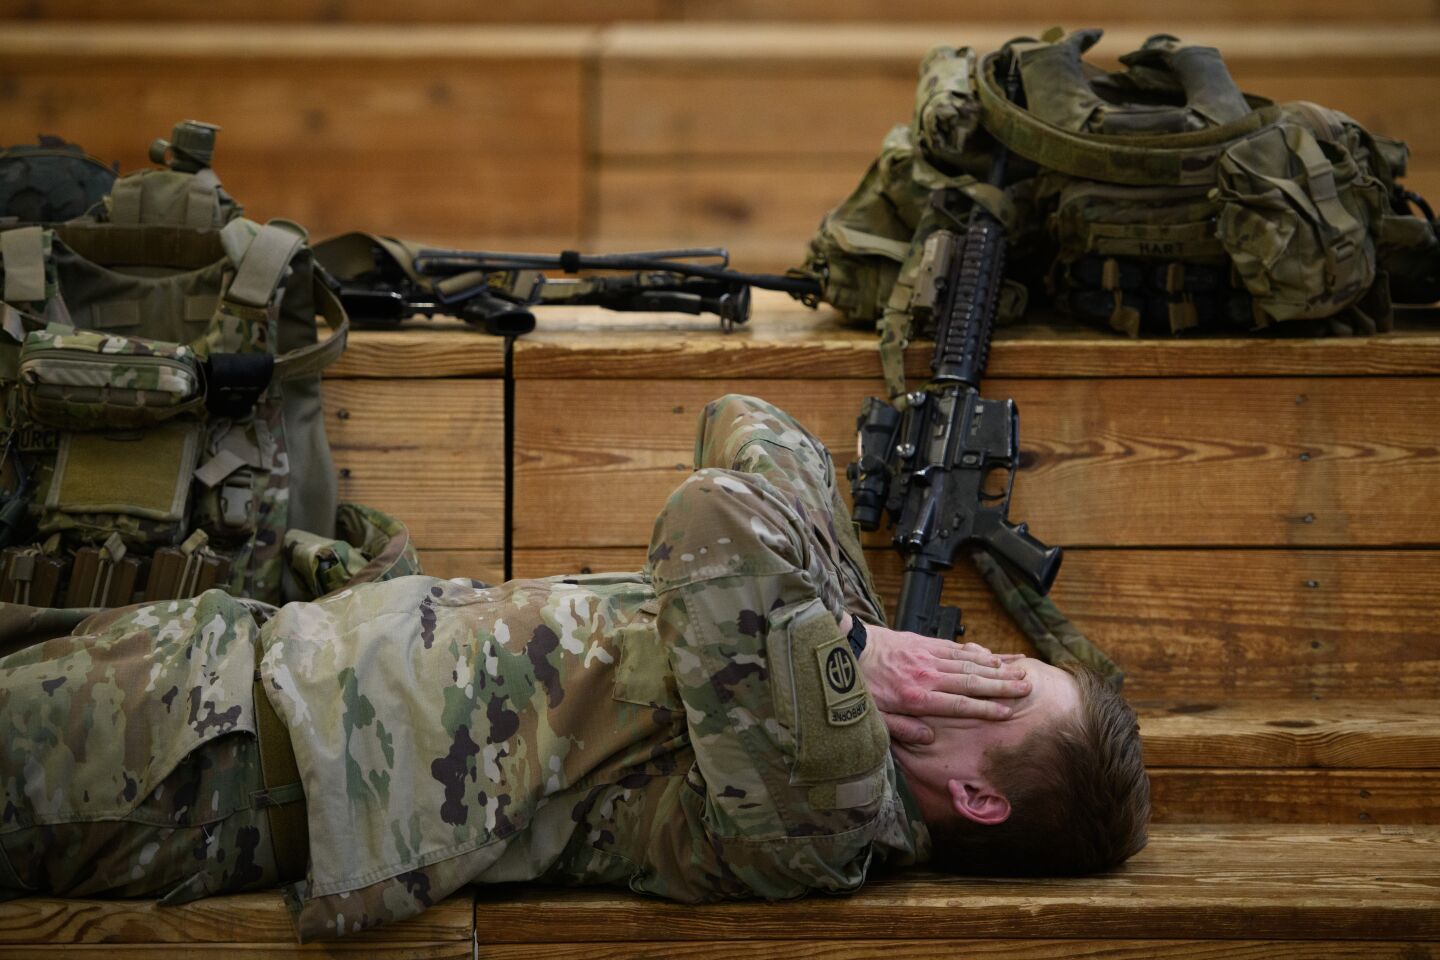 U.S. troops from the Army's 82nd Airborne Division rest Jan. 4 at Ft. Bragg before deployment.